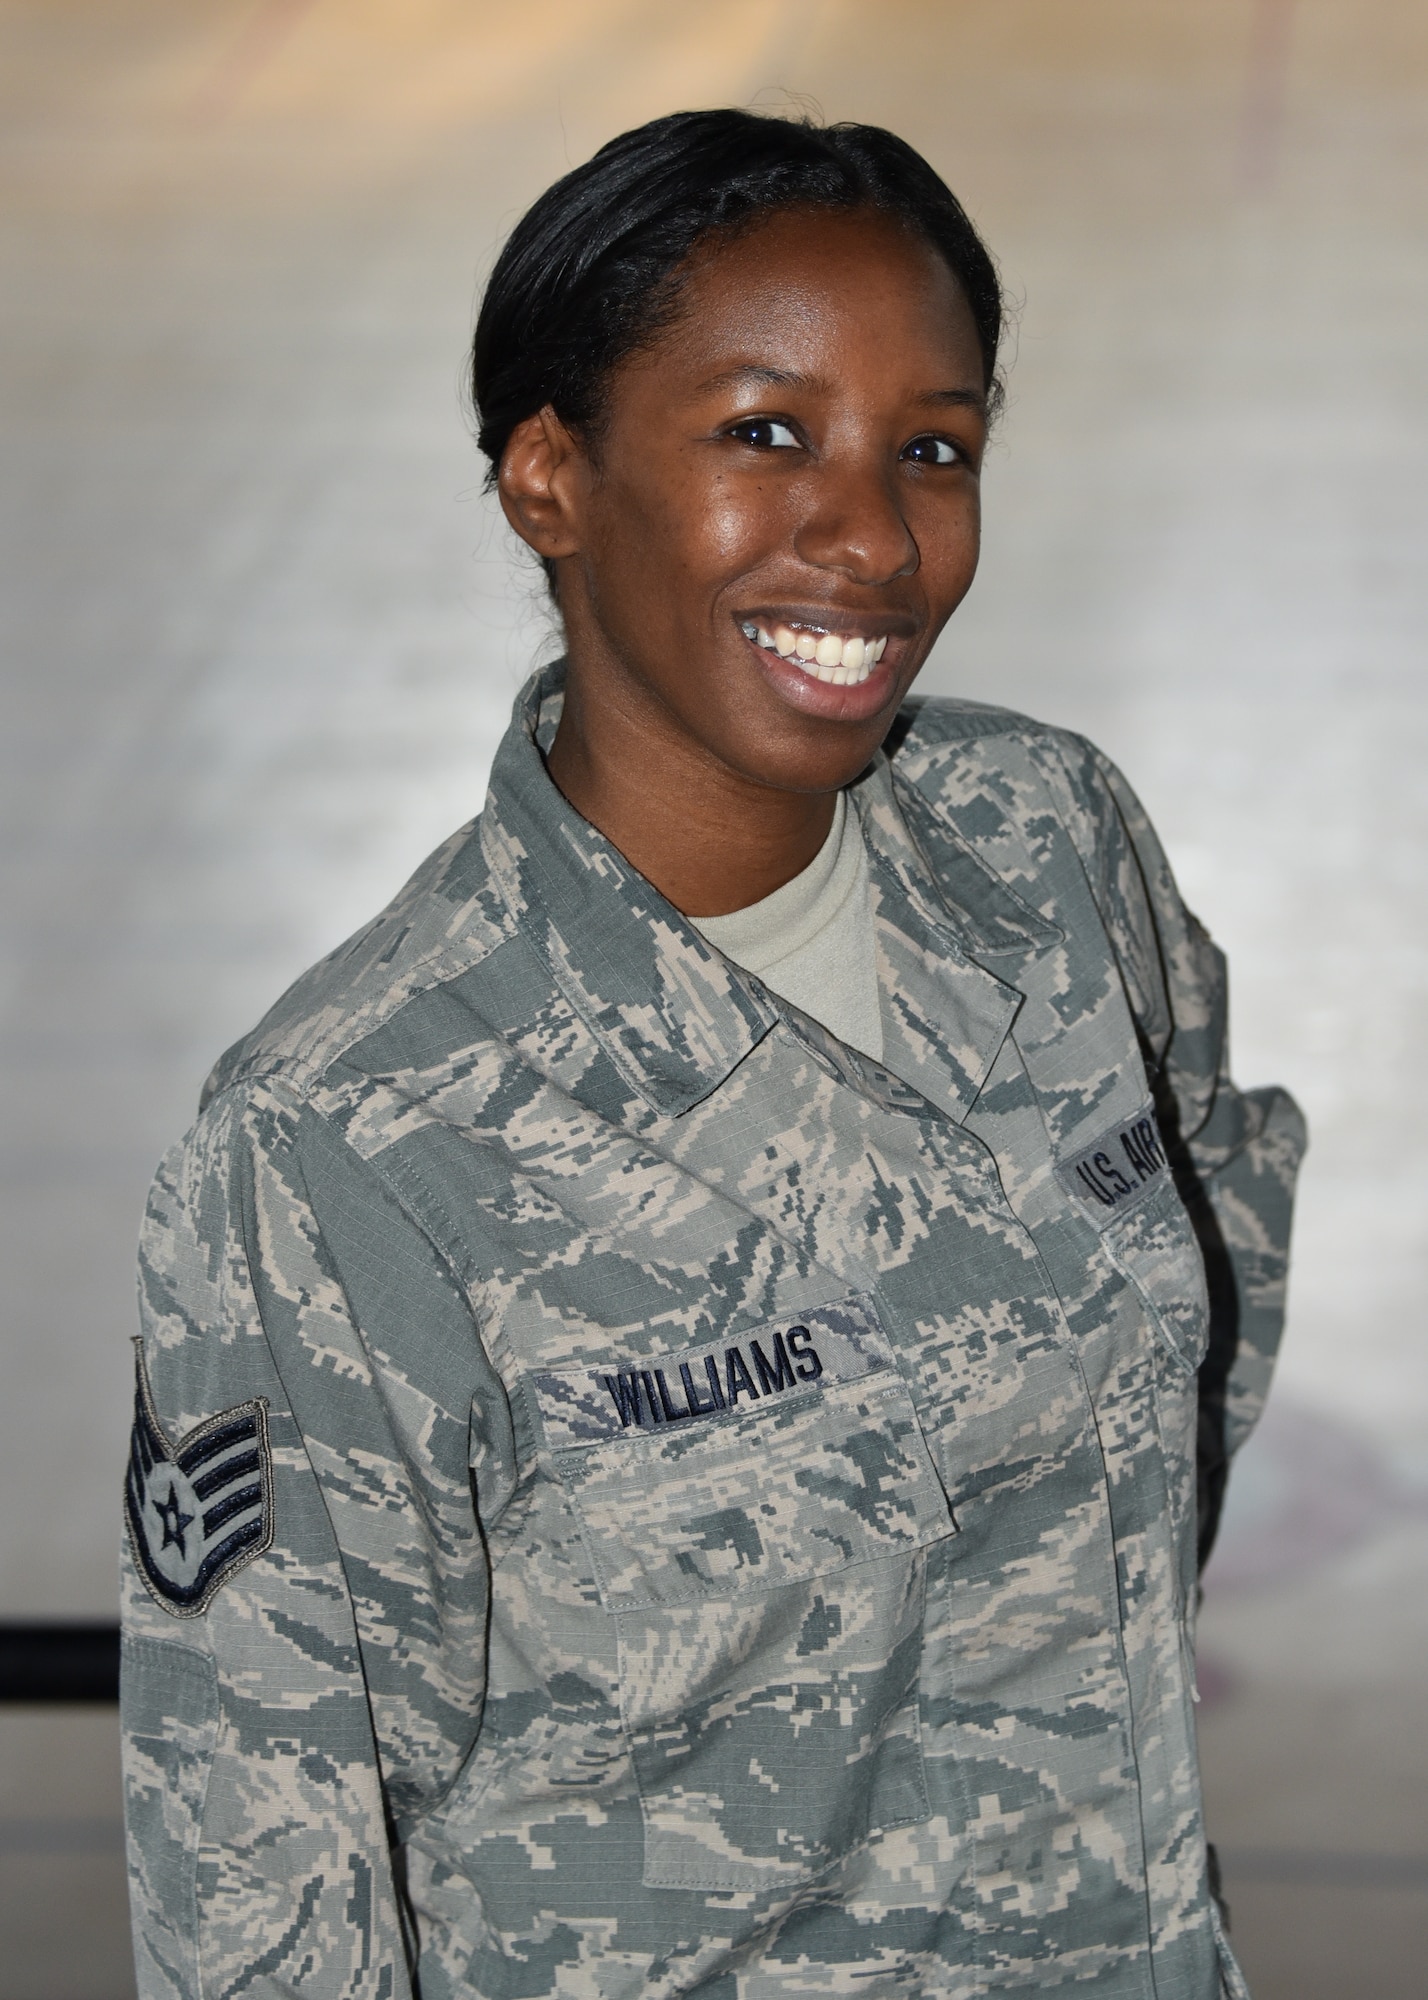 Staff Sgt. Chenelle Williams, Human Resource Specialist at Joint Force Headquarters, poses at the Fifth Regiment Armory, Baltimore, Md. Williams is the Maryland Air National Guard May Spotlight Airman. (U.S Air National Guard Photo by Senior Master Sgt. Ed Bard/RELEASED)